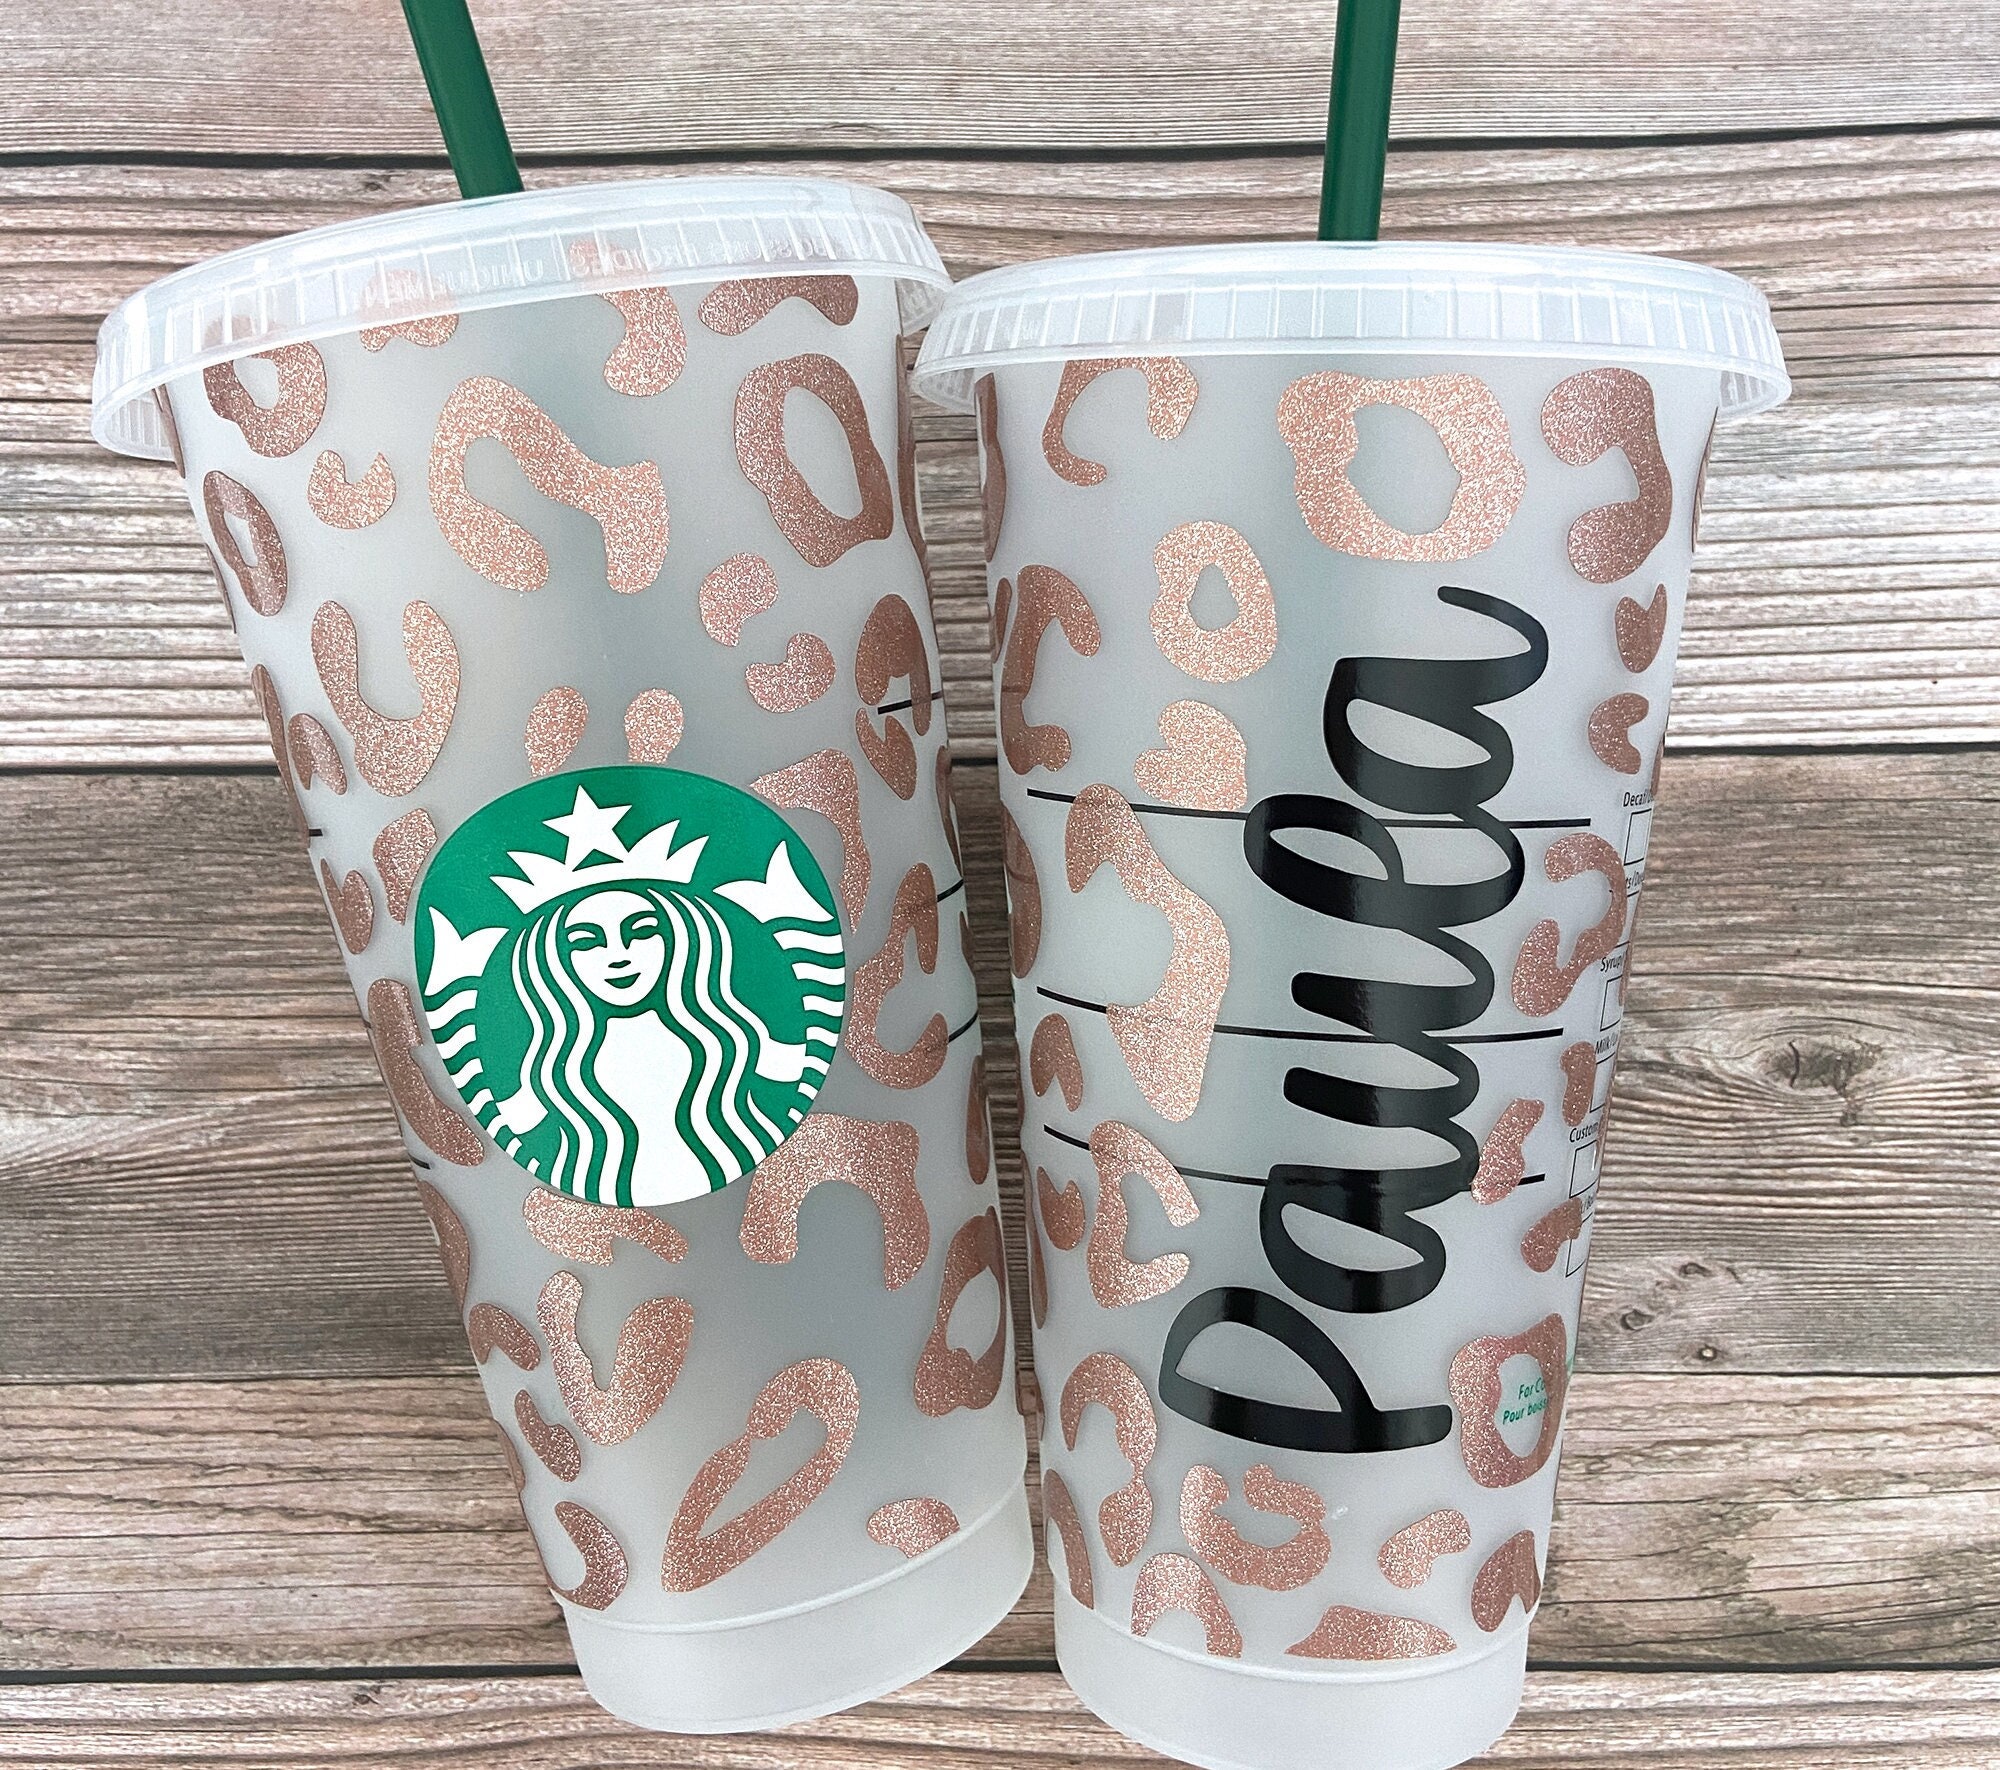 Printing customized Starbucks cup thermoflask By outdoor travel wholesale